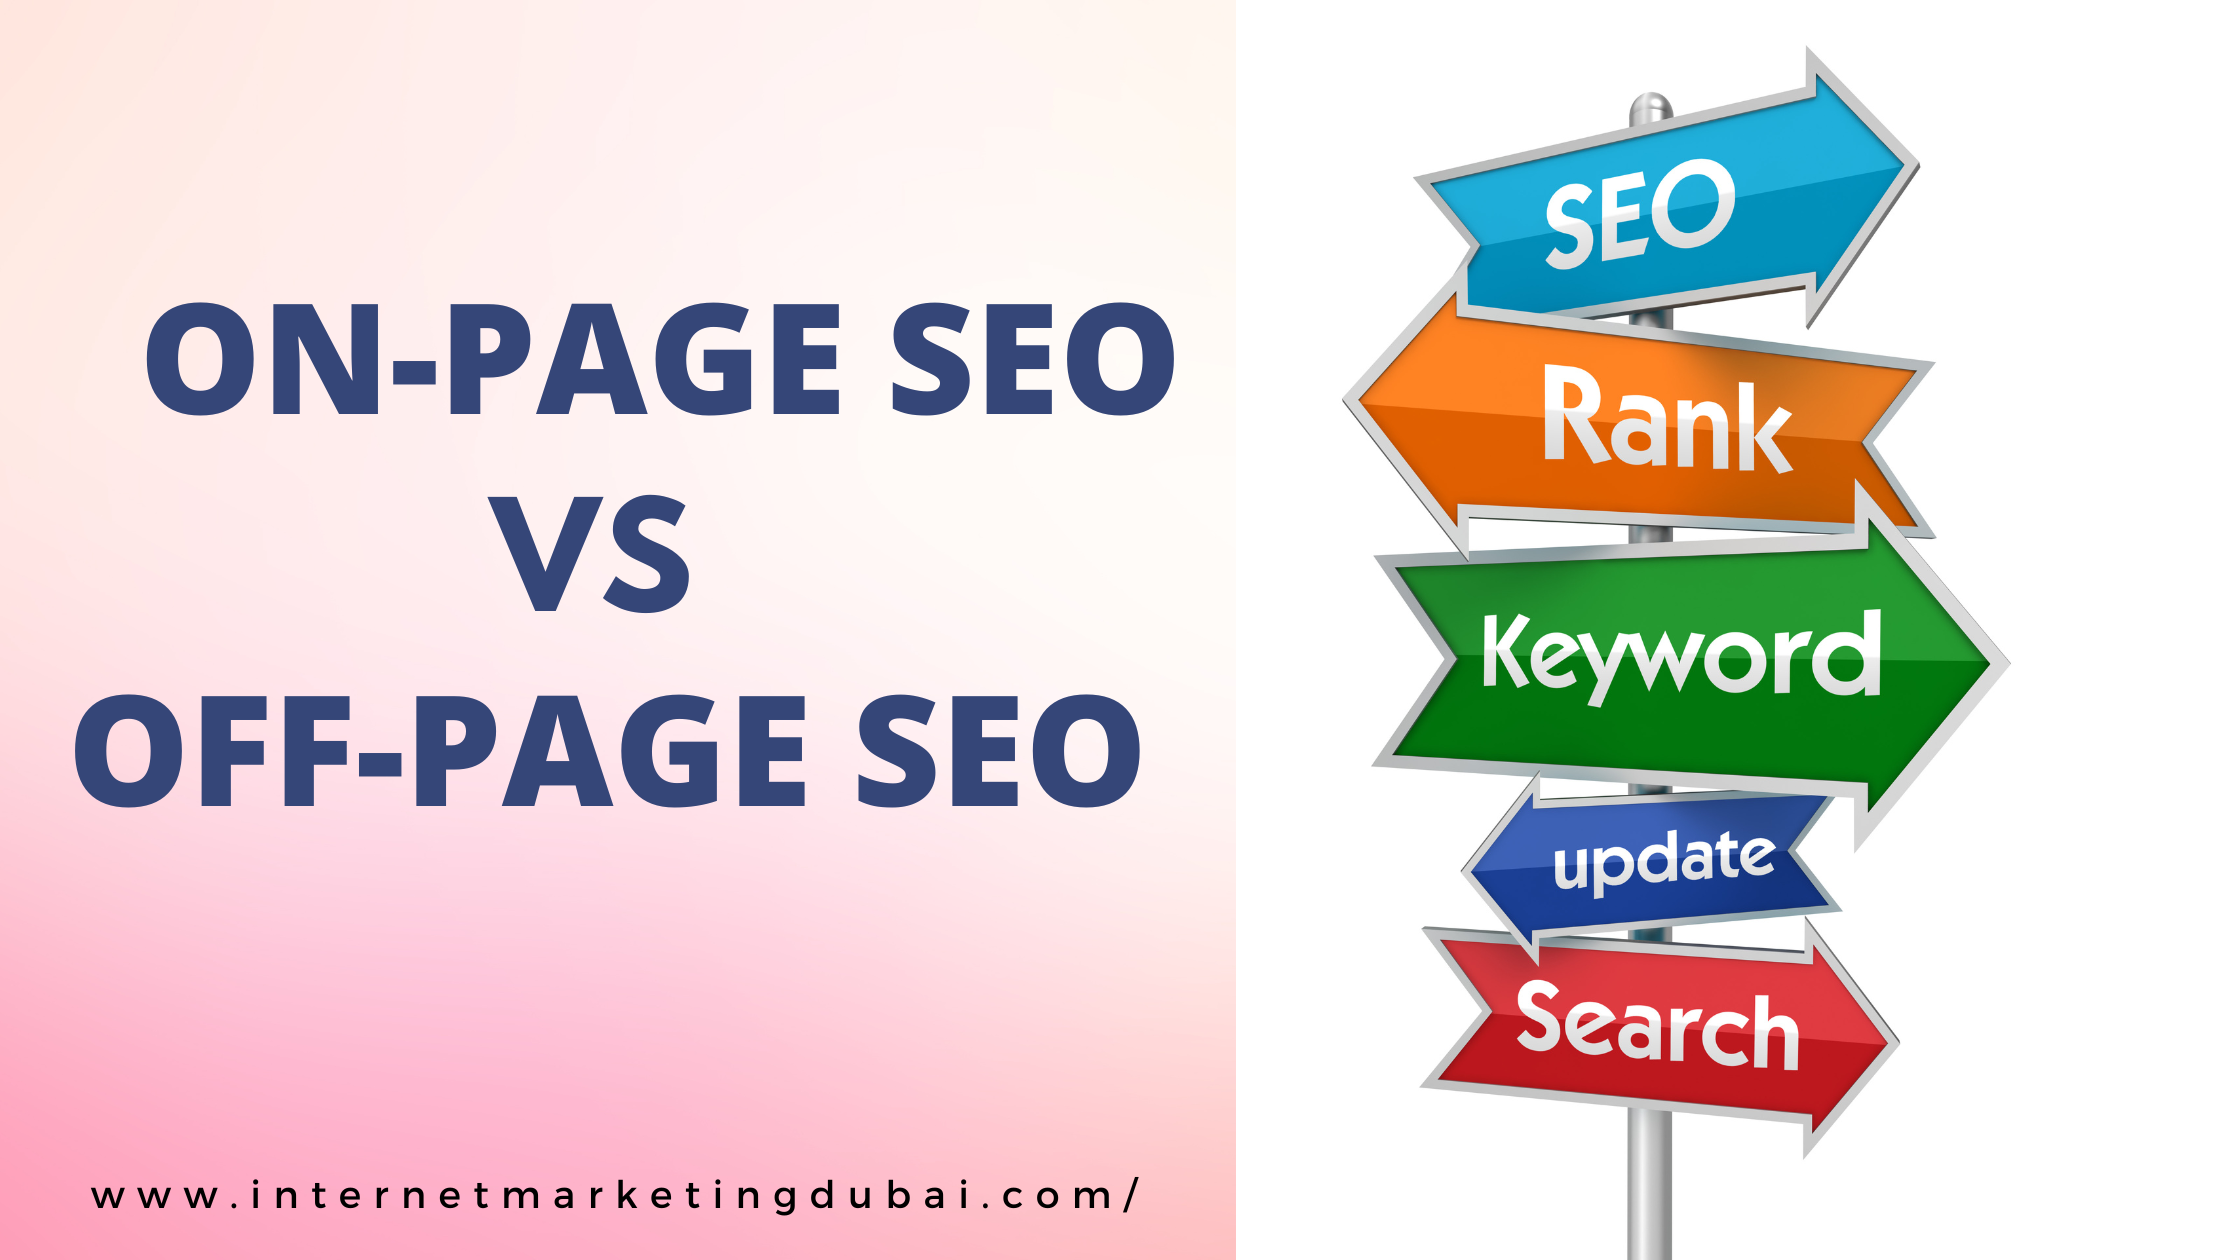 On-Page seo vs Off-Page seo